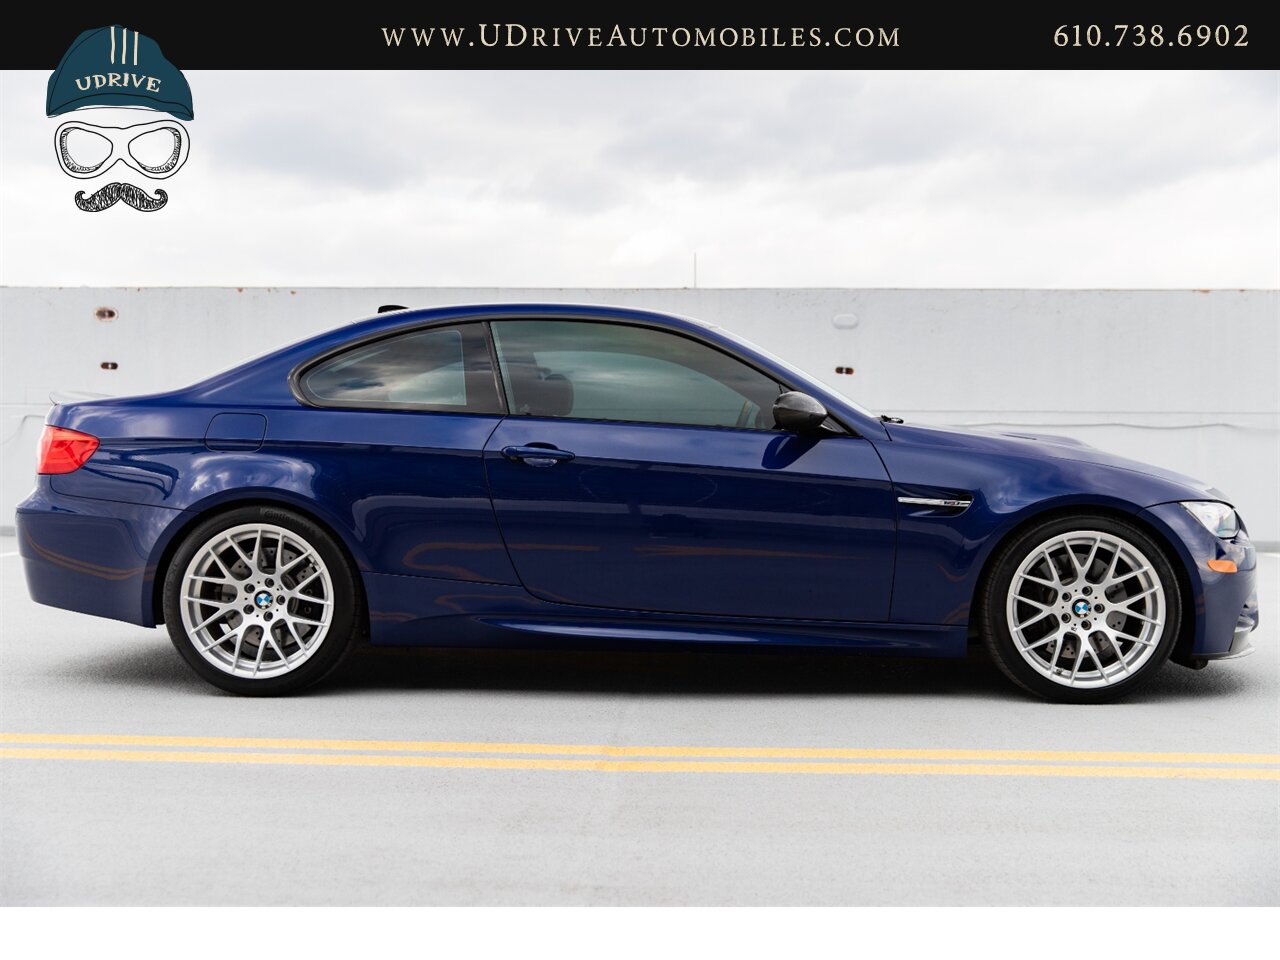 2011 BMW M3 E92 6 Speed Manual Competition Pkg Interlagos Blue  16k Miles Nav PDC EDC Comf Acc - Photo 17 - West Chester, PA 19382